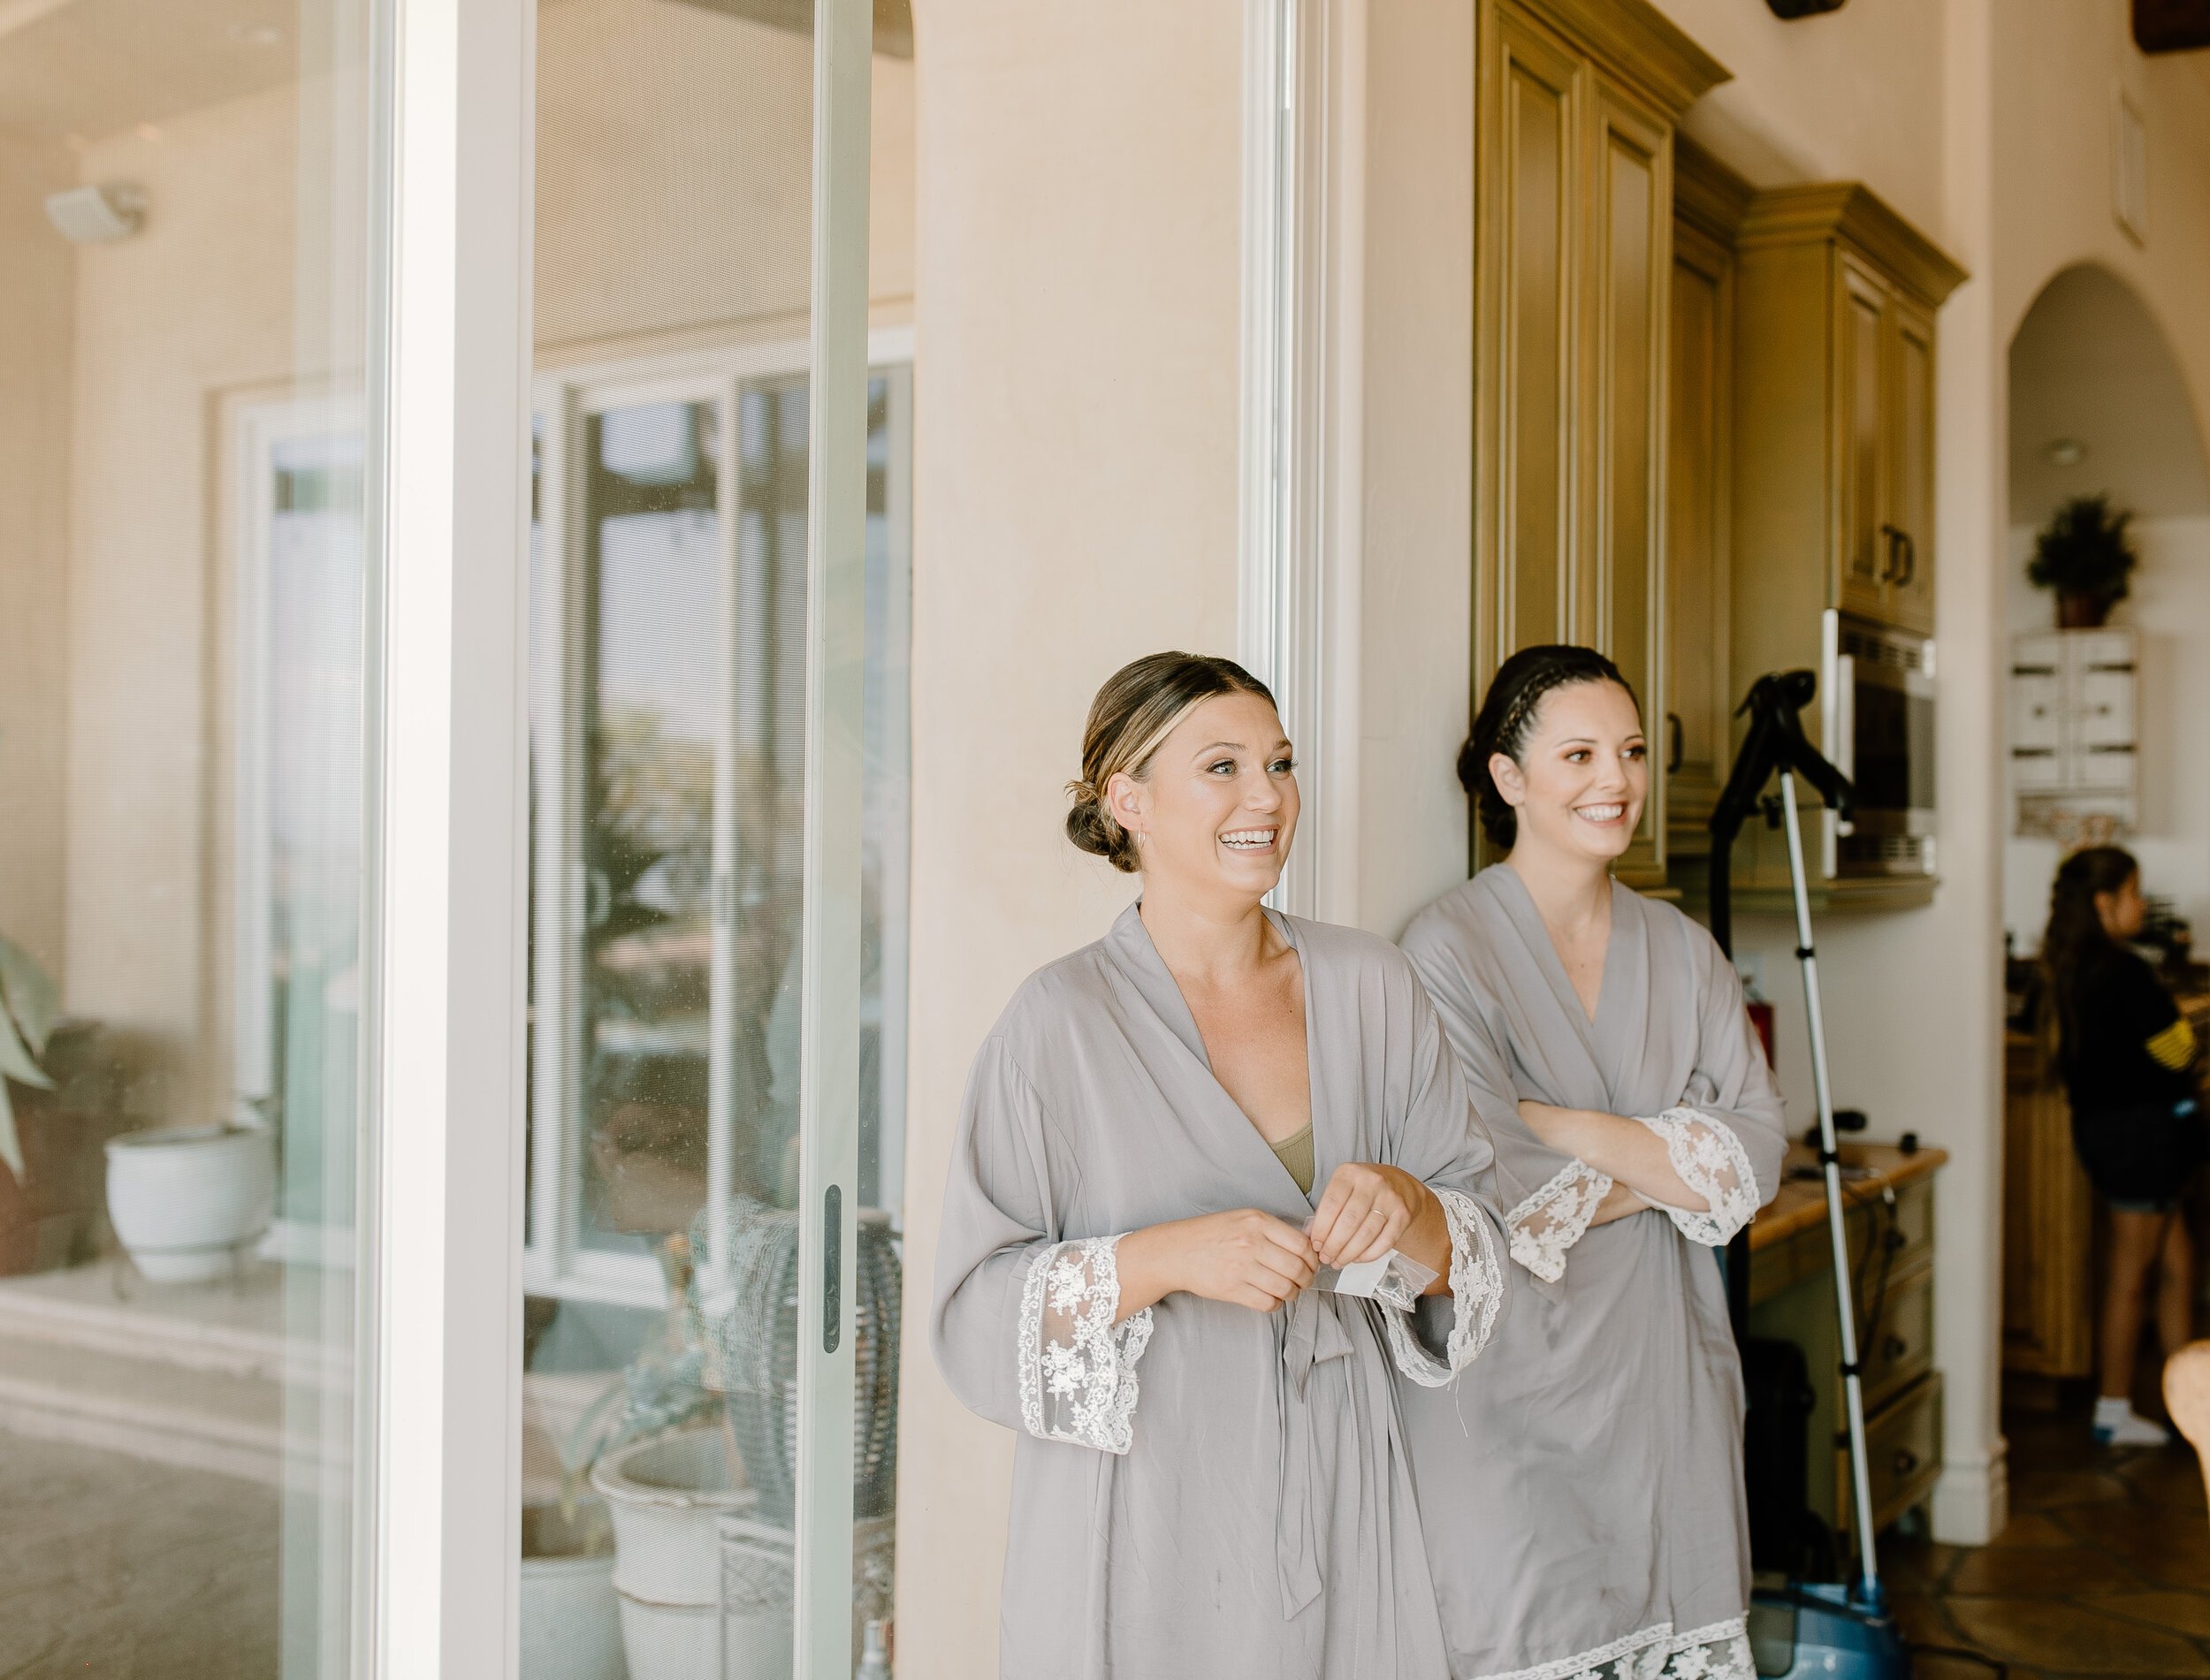 www.santabarbarawedding.com | Events by Fran | Becca Romero Creative | Makeup by Raven | HoneyDo Hair | Bridesmaids Getting Ready with the Bride